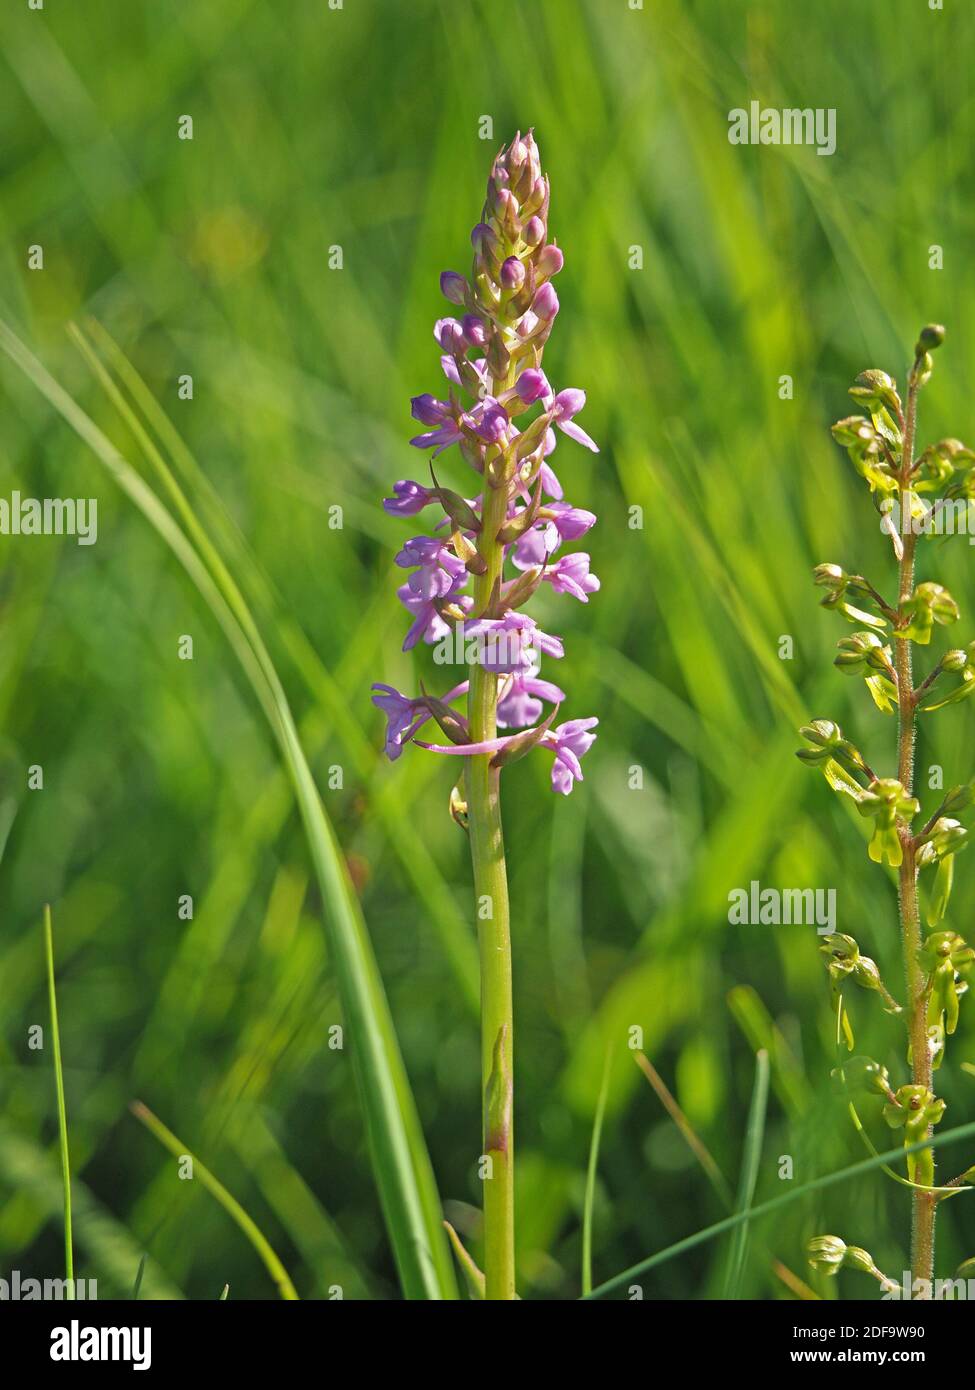 mass of pink flowers with long spurs on tall flowerspike of Fragrant Orchid (Gymnadenia conopsea) at Cumbria Wildlife Trust Reserve, England UK Stock Photo